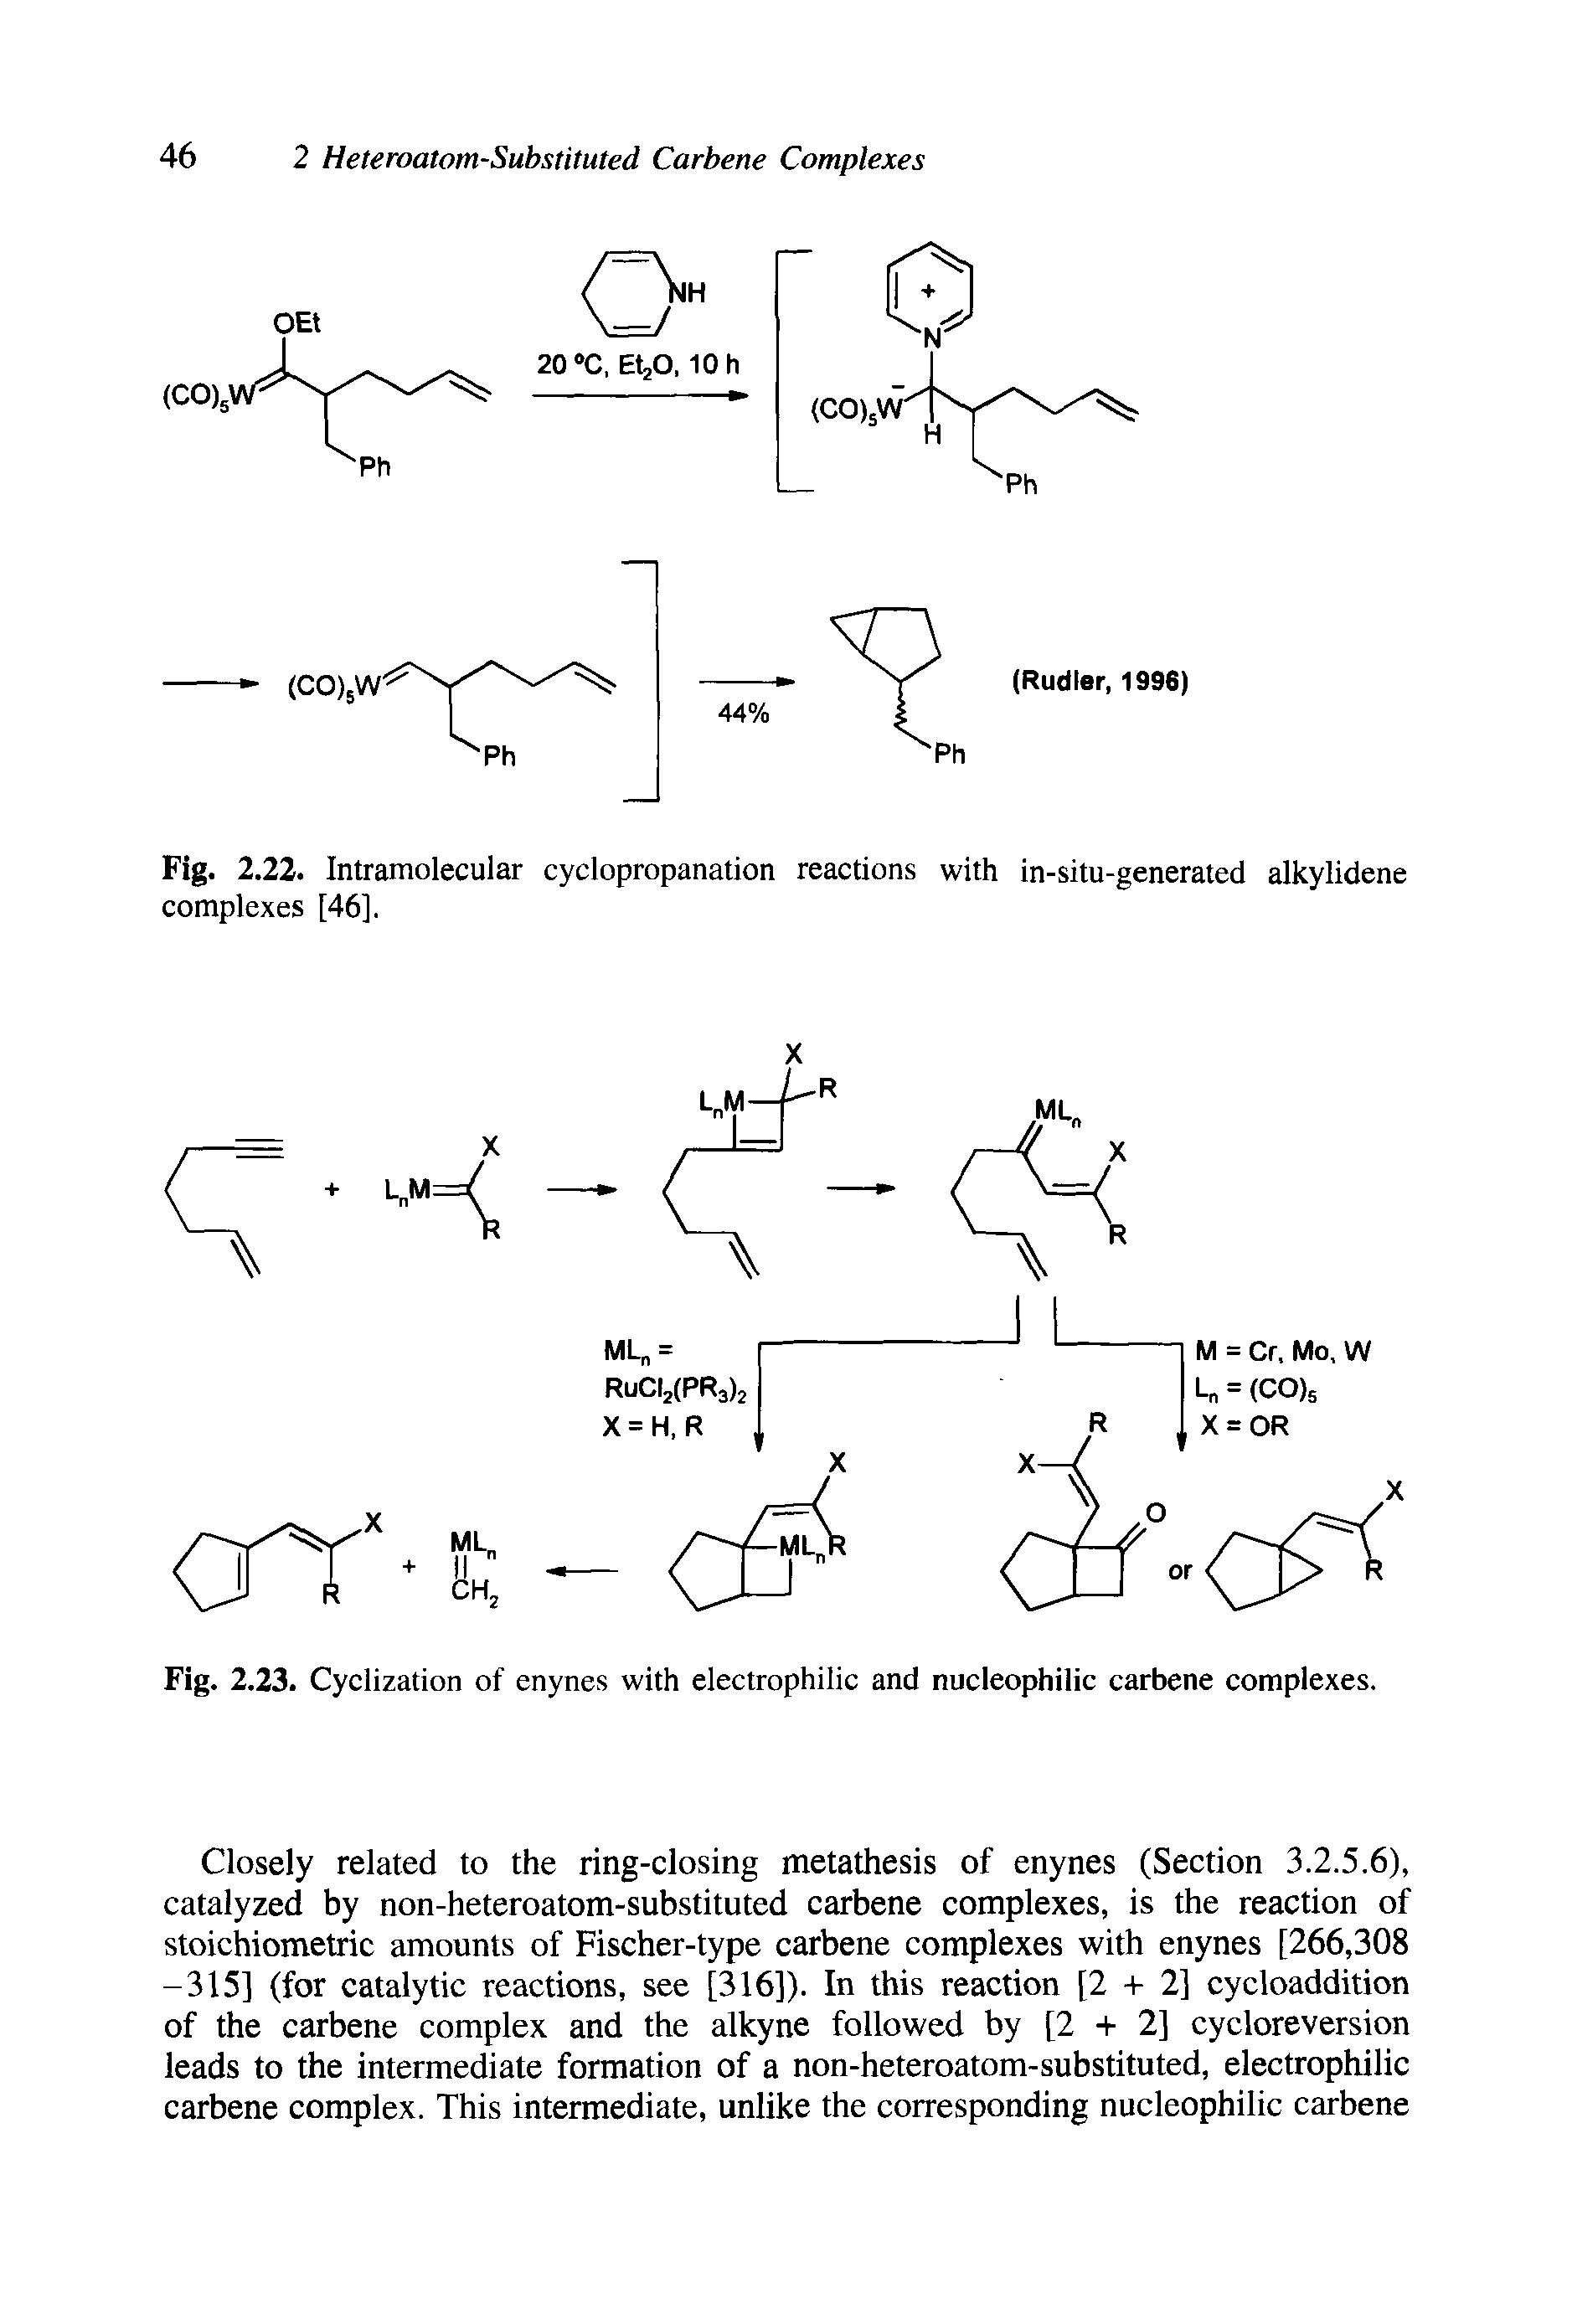 Fig. 2.22. Intramolecular cydopropanation reactions with in-situ-generated alkylidene complexes [46],...